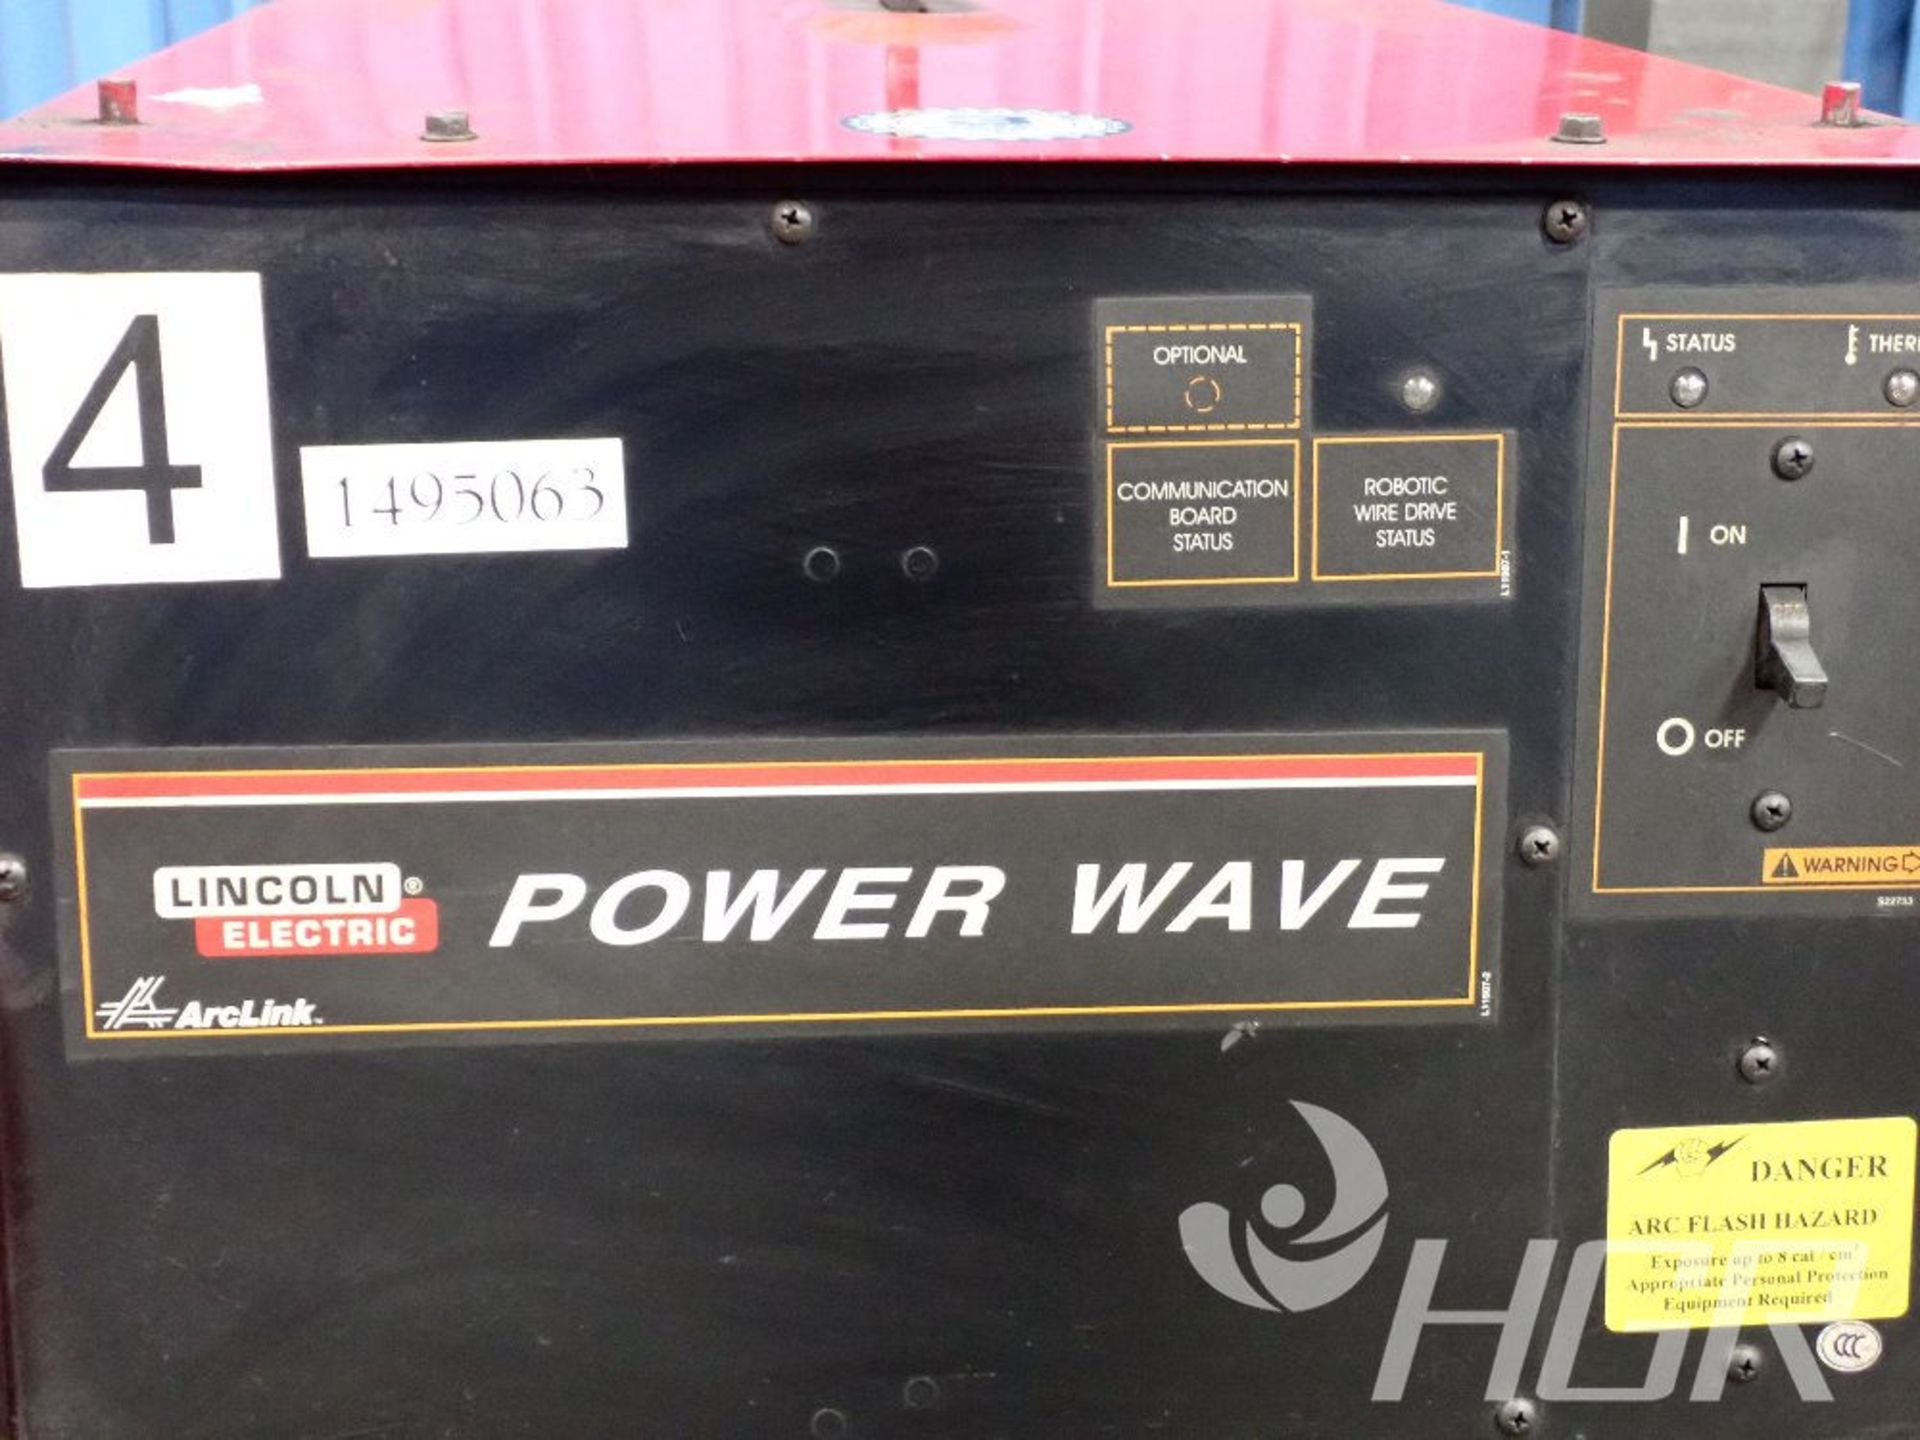 LINCOLN ELECTRIC WELDER, Model POWER WAVE 455M, Date: n/a; s/n SPLC42304401050804385, Approx. - Image 3 of 8